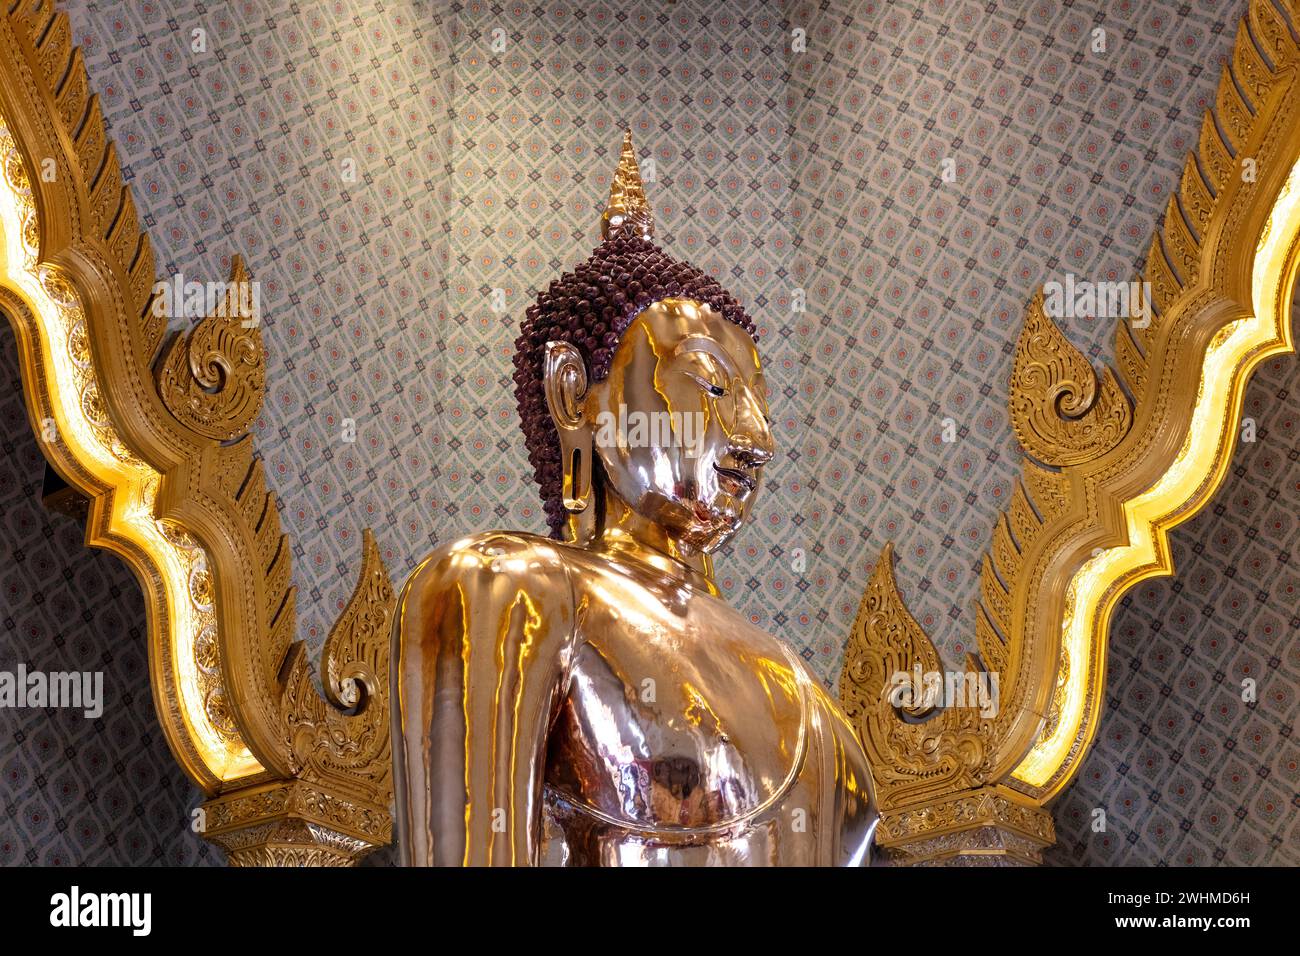 Closeup of golden Buddha statue, Wat Traimit (Temple of the Golden Buddha). Made of 18 karat gold, it is 3 meters (nearly 10 feet) tall, and weighs 5. Stock Photo